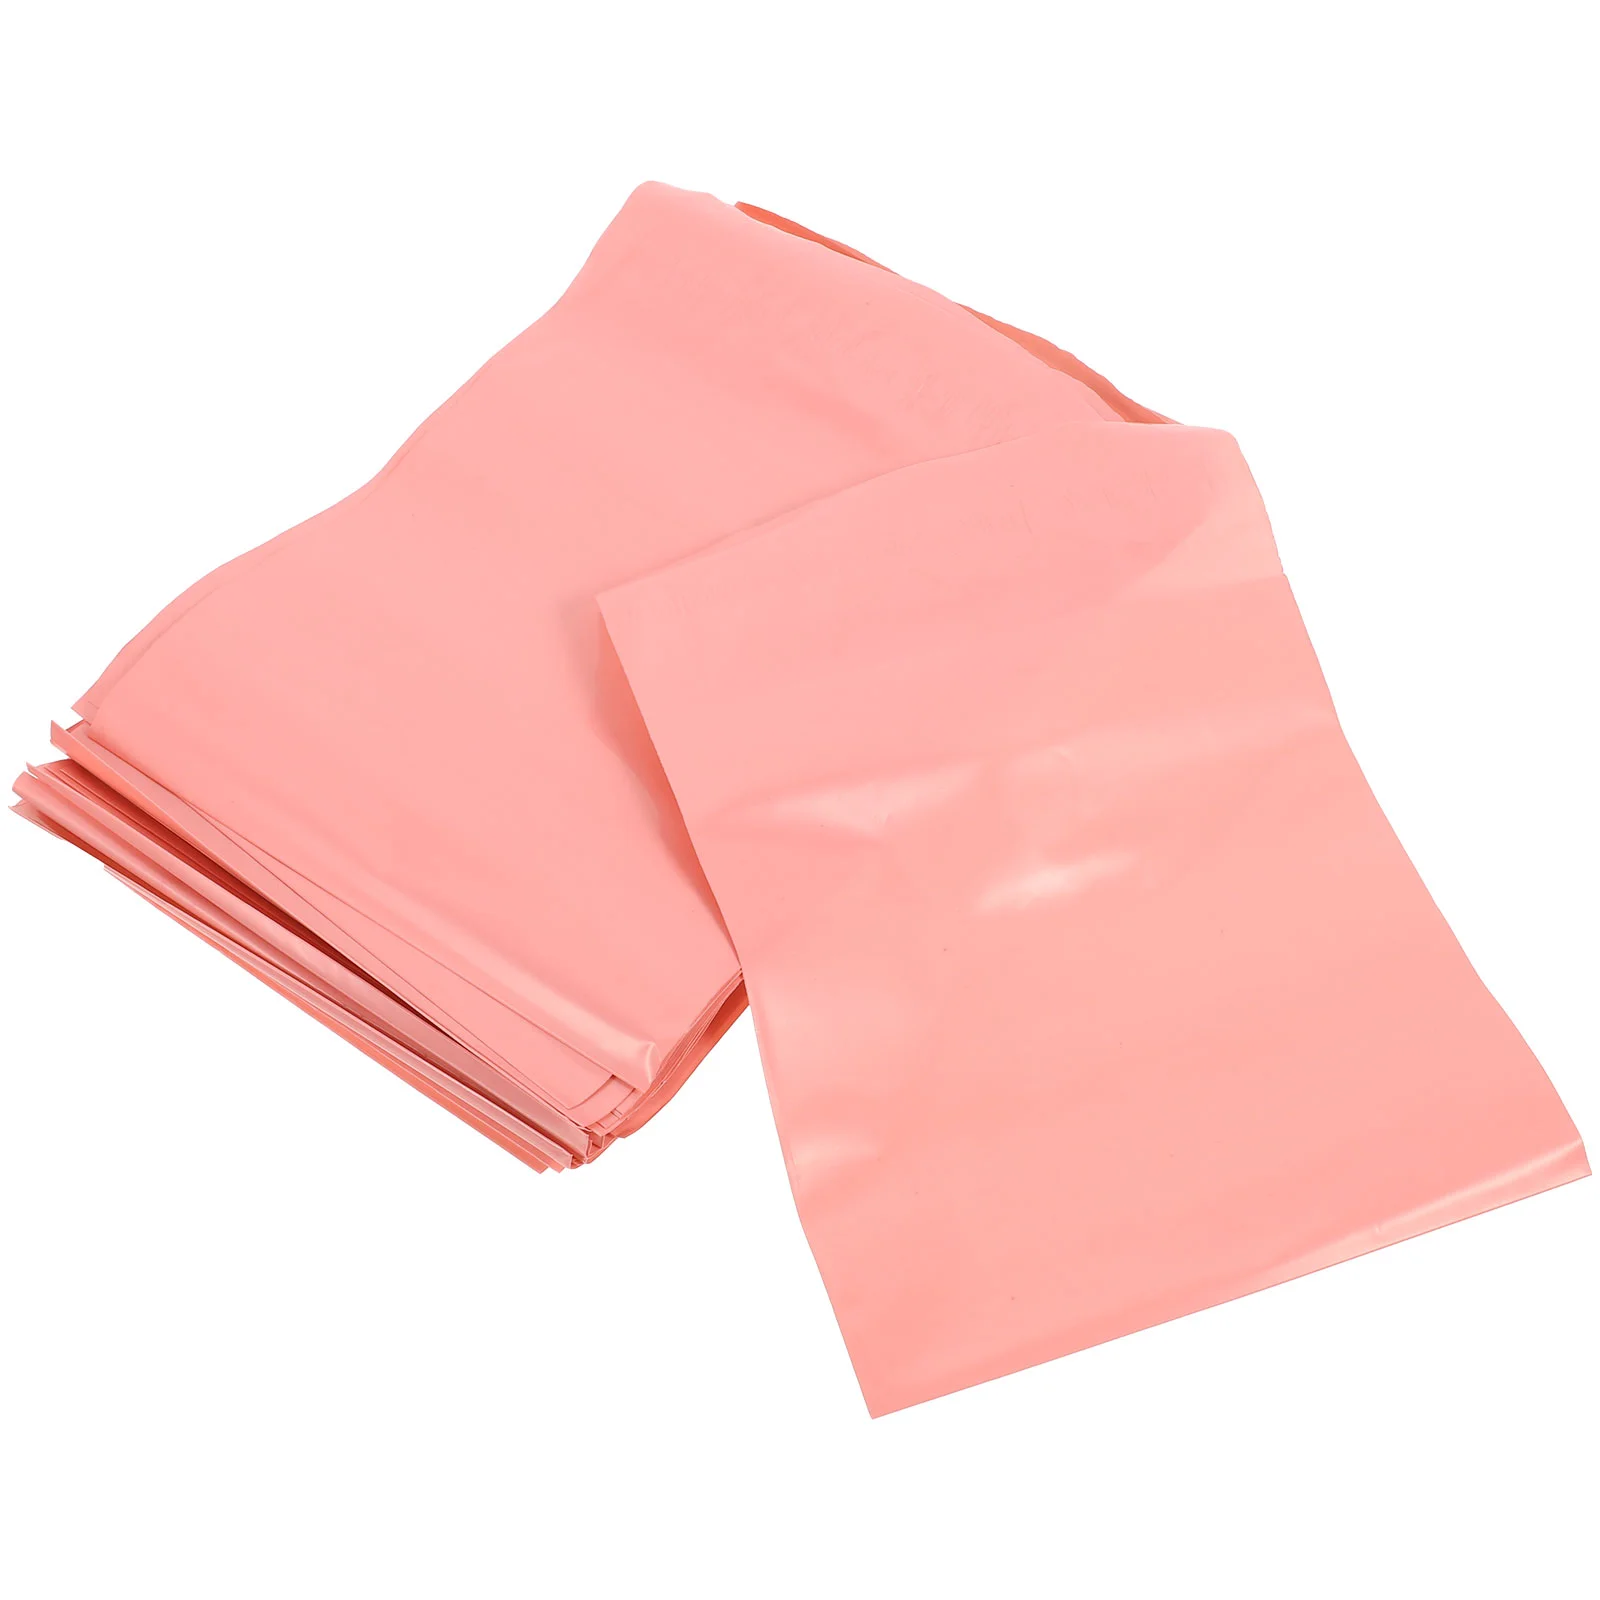 

200 Pcs Hygiene Bag Disposal Bags Sanitary Napkin Holders Pink Containers Tampon Waterproof Period Pad Womens Pouch Disposable